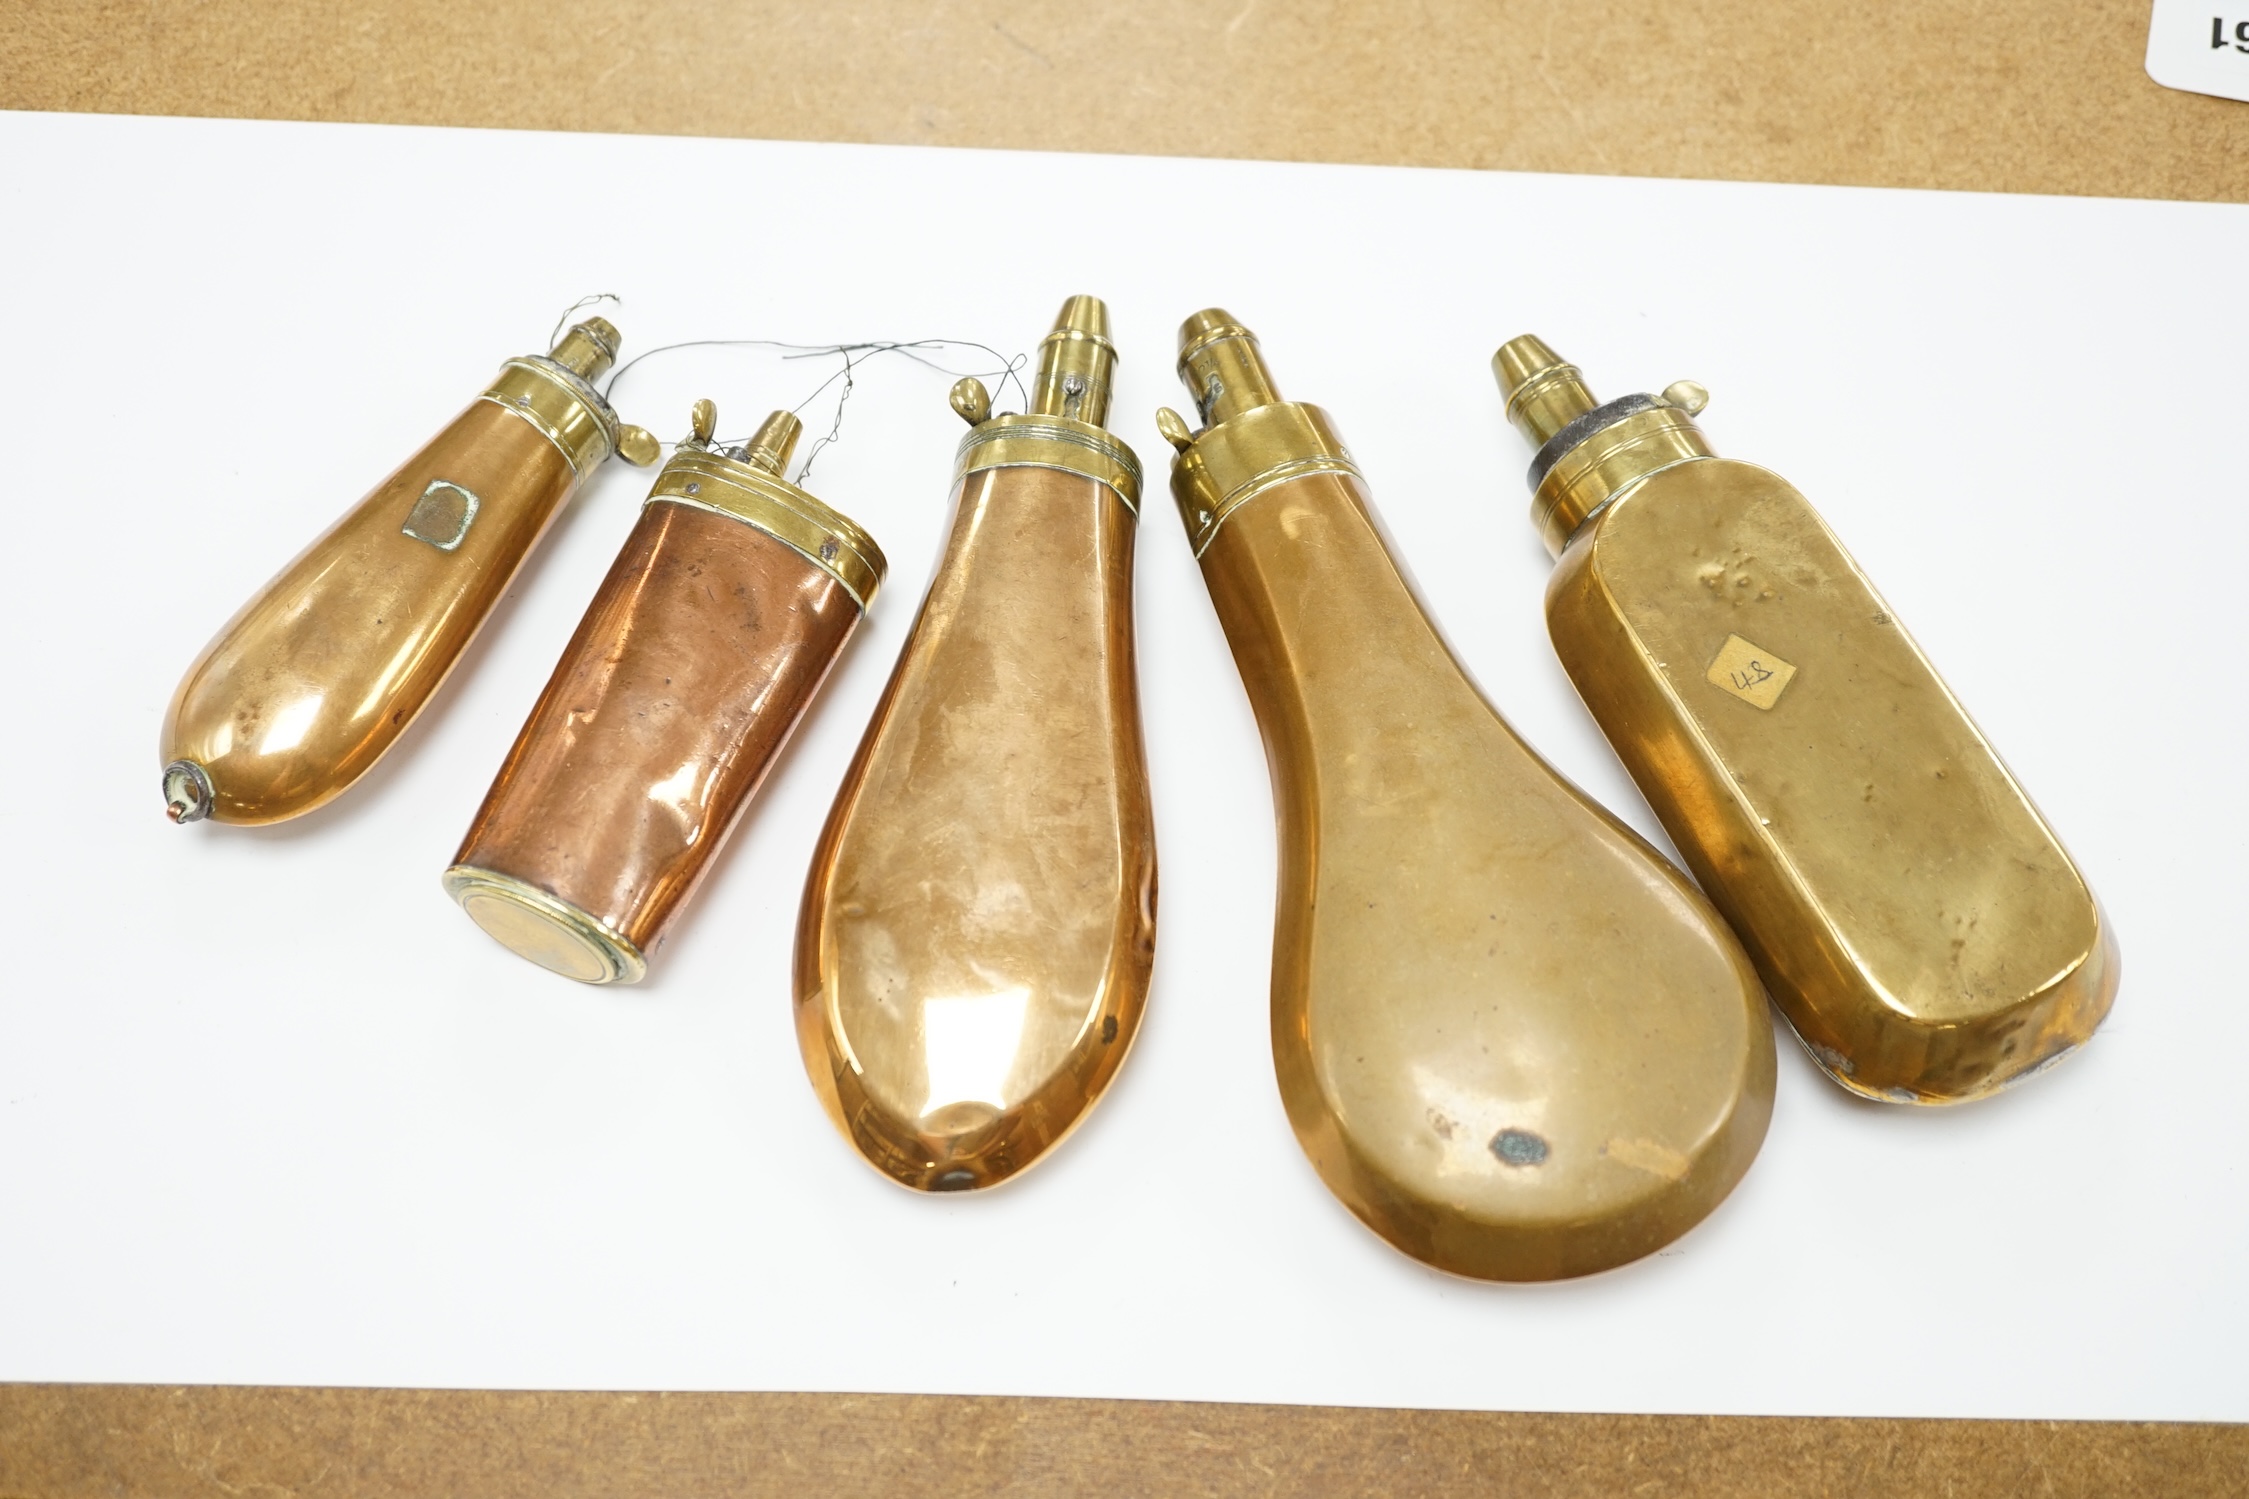 Five 19th century copper and brass powder flasks, all with plain copper bodies. Condition - fair